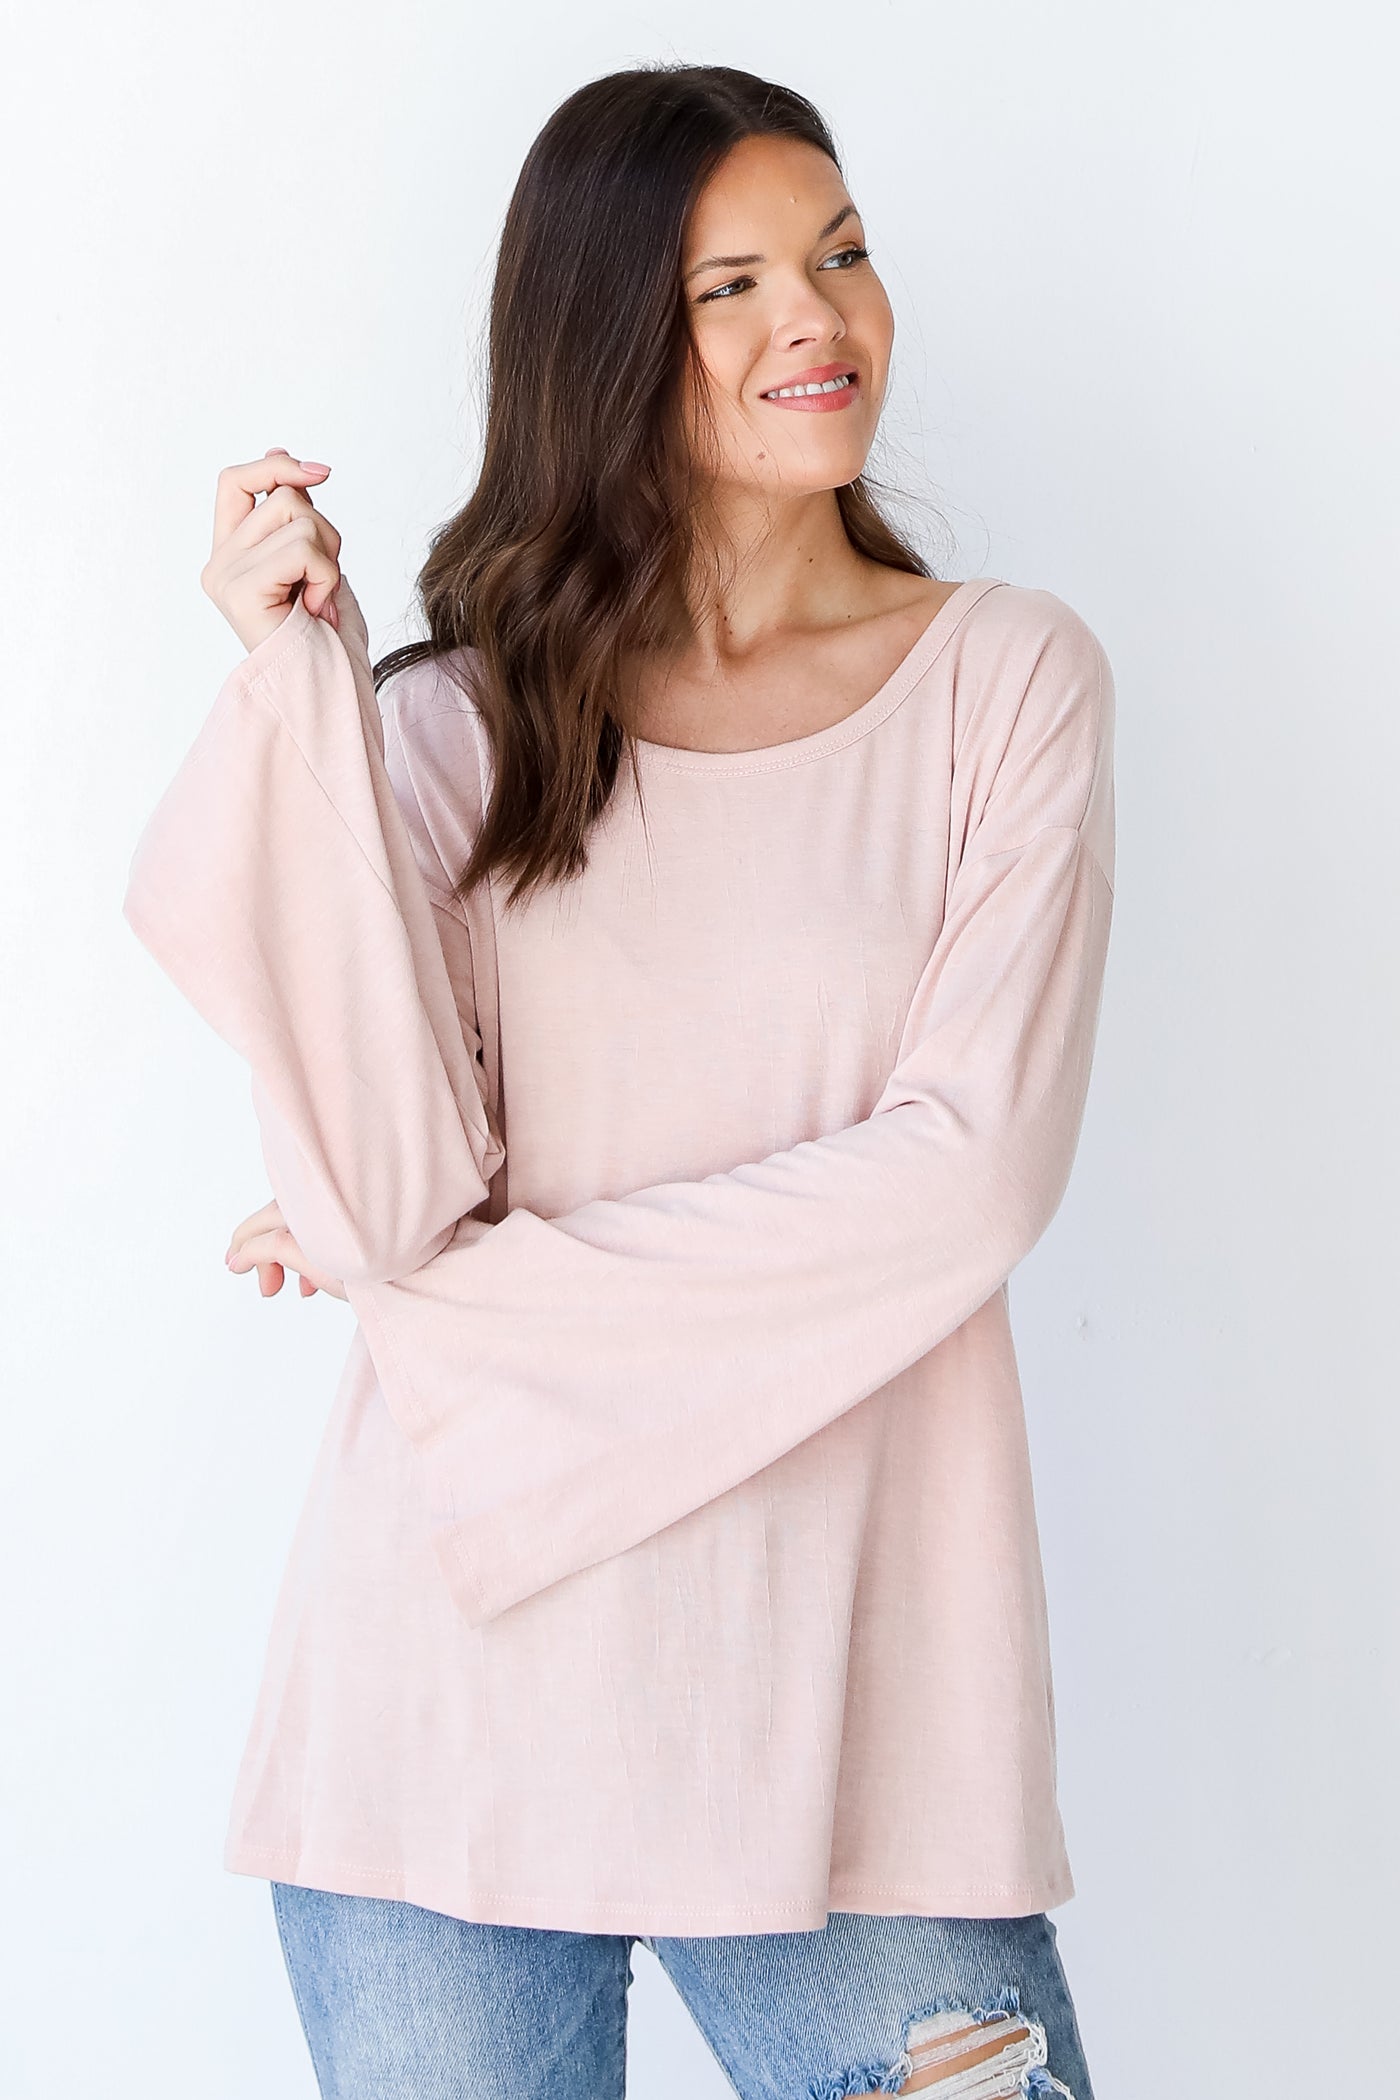 Knit Top in blush on model